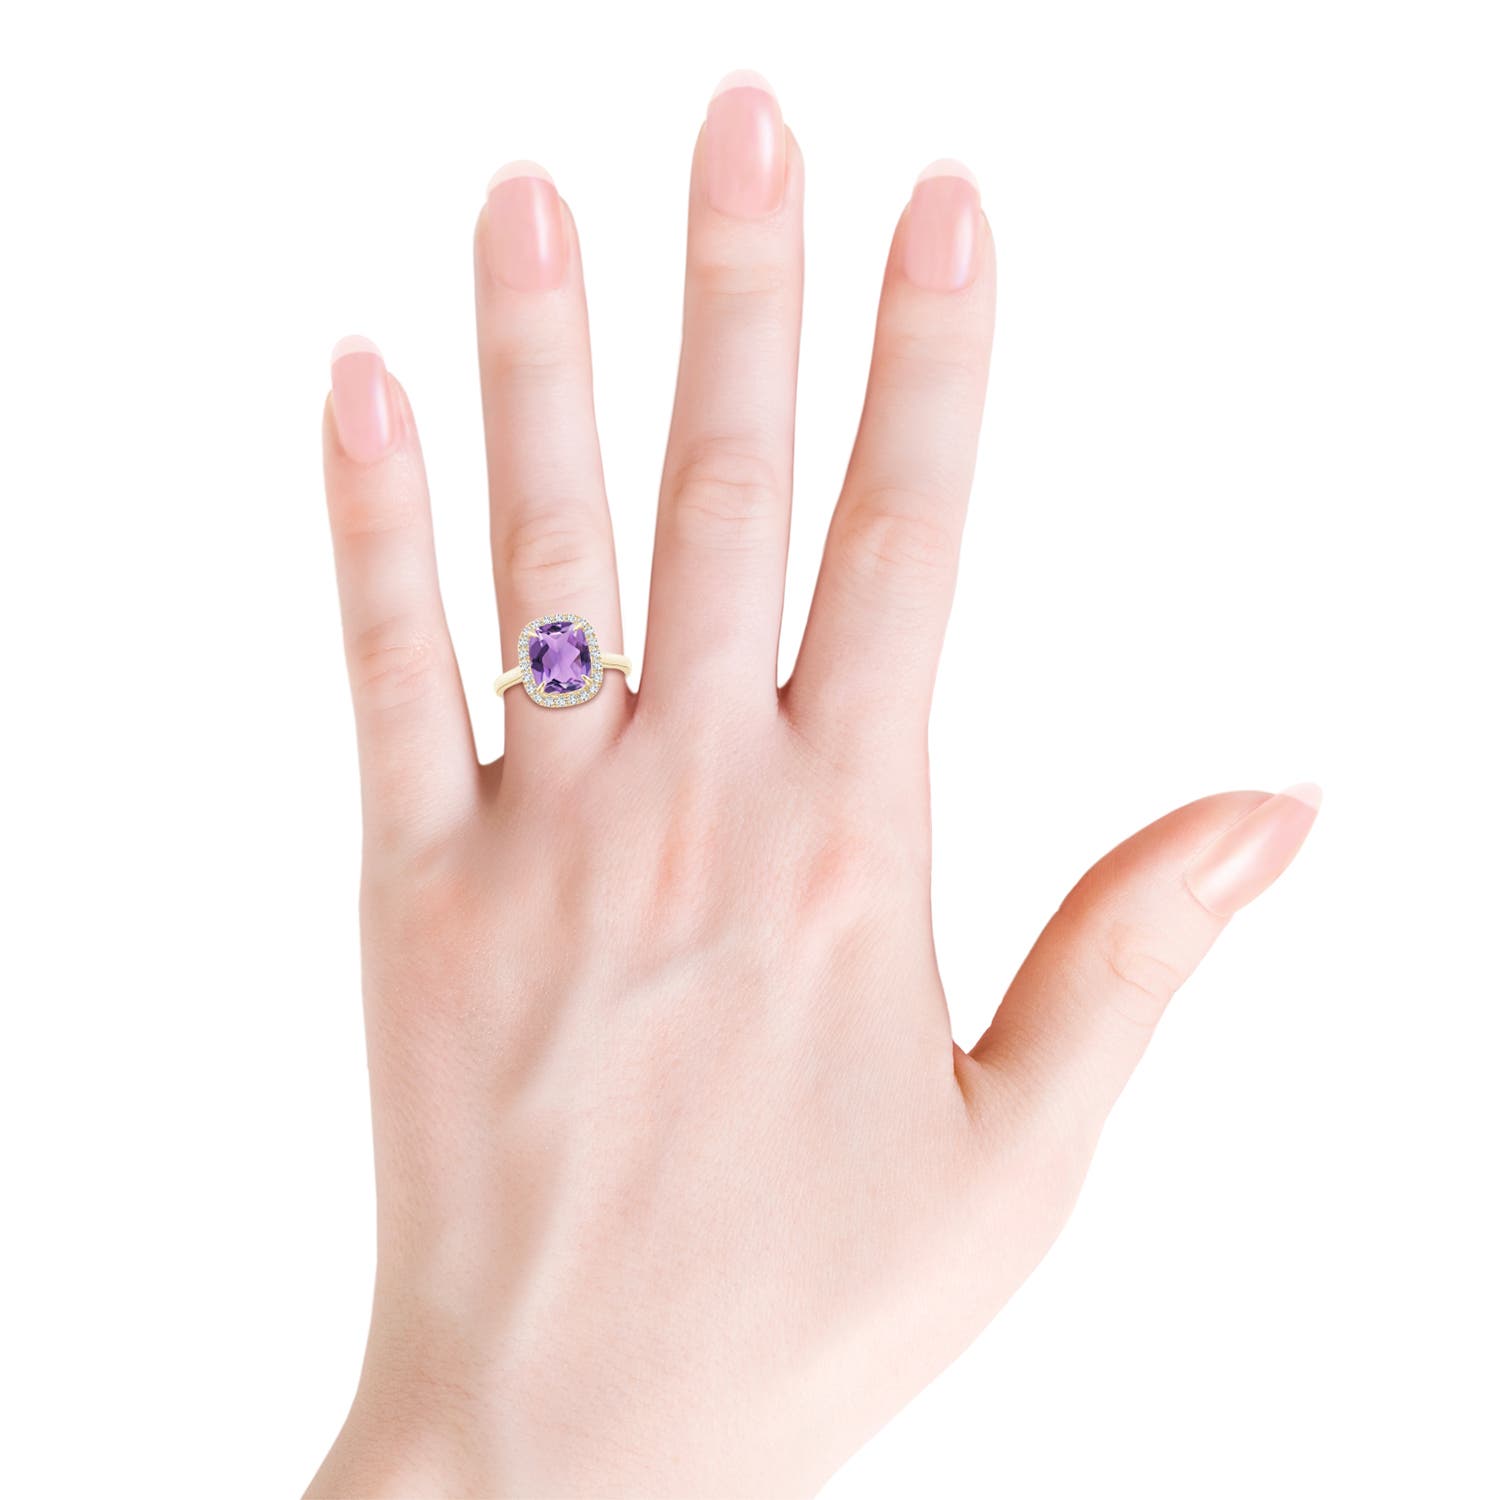 A - Amethyst / 3.01 CT / 14 KT Yellow Gold